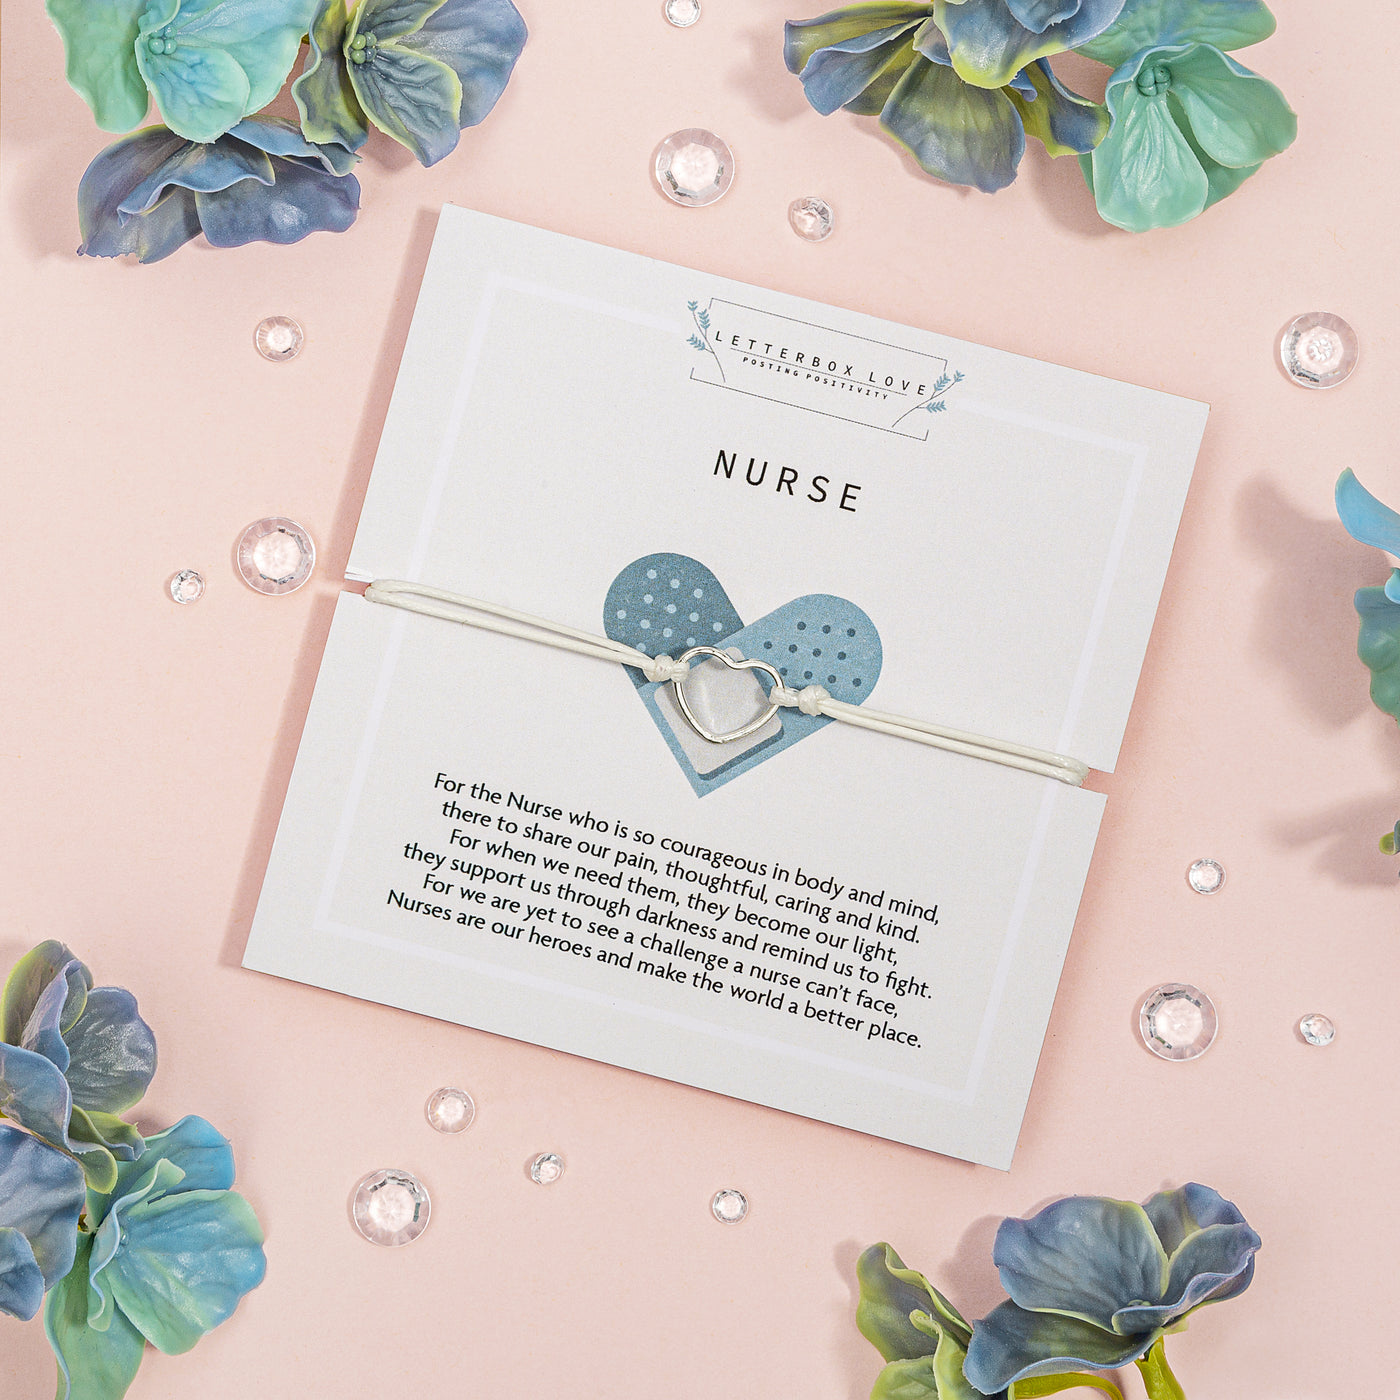 White bracelet with a silver heart-shaped charm showcased on a white 'NURSE' appreciation card with a heartfelt message about their courage and care, surrounded by blue-green flowers and crystal accents on a soft pink background